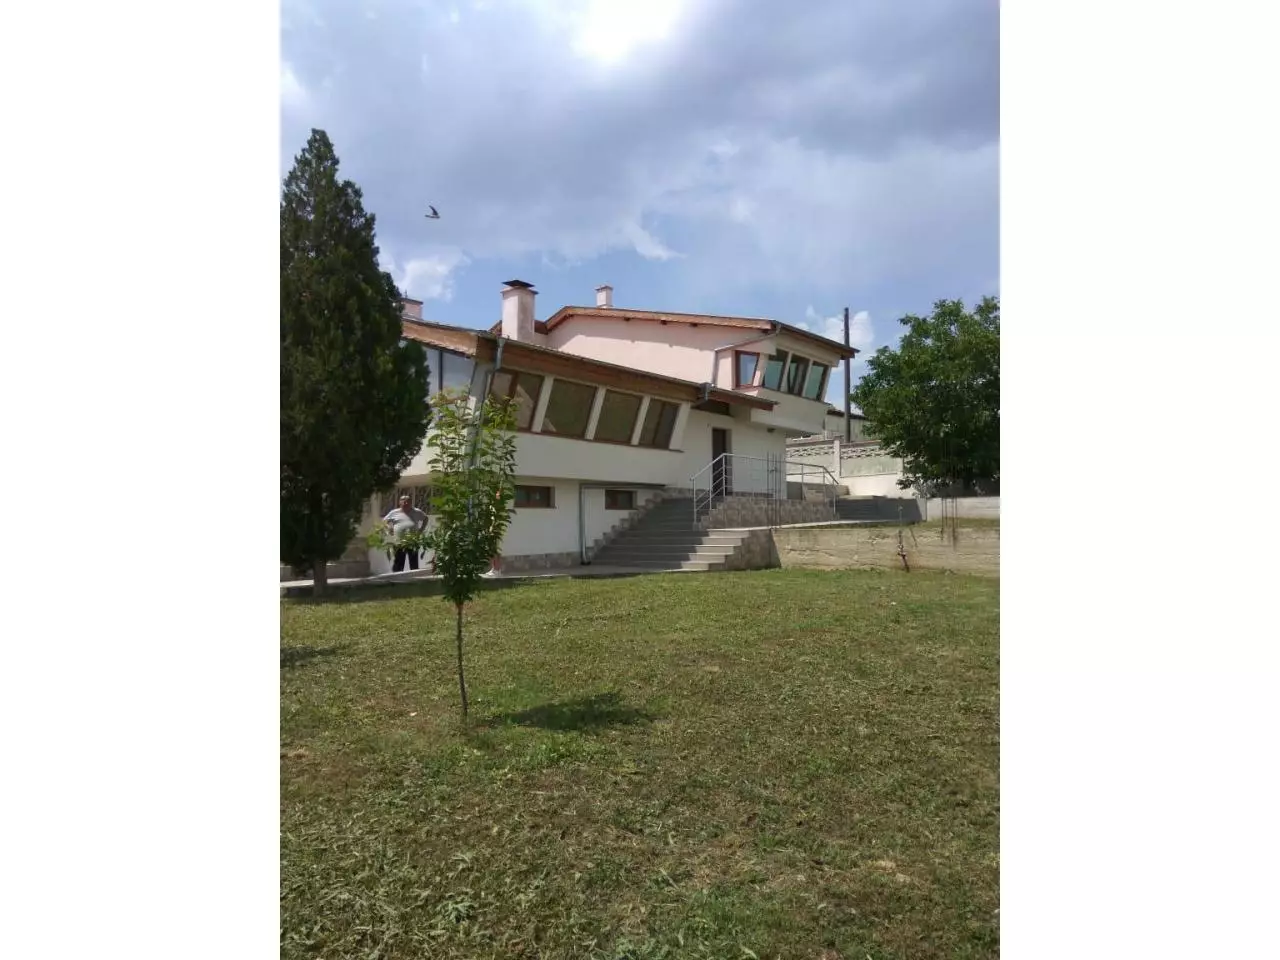 For sale a new house with an area of 370 sq.m. in the Bulgarian - 2/12